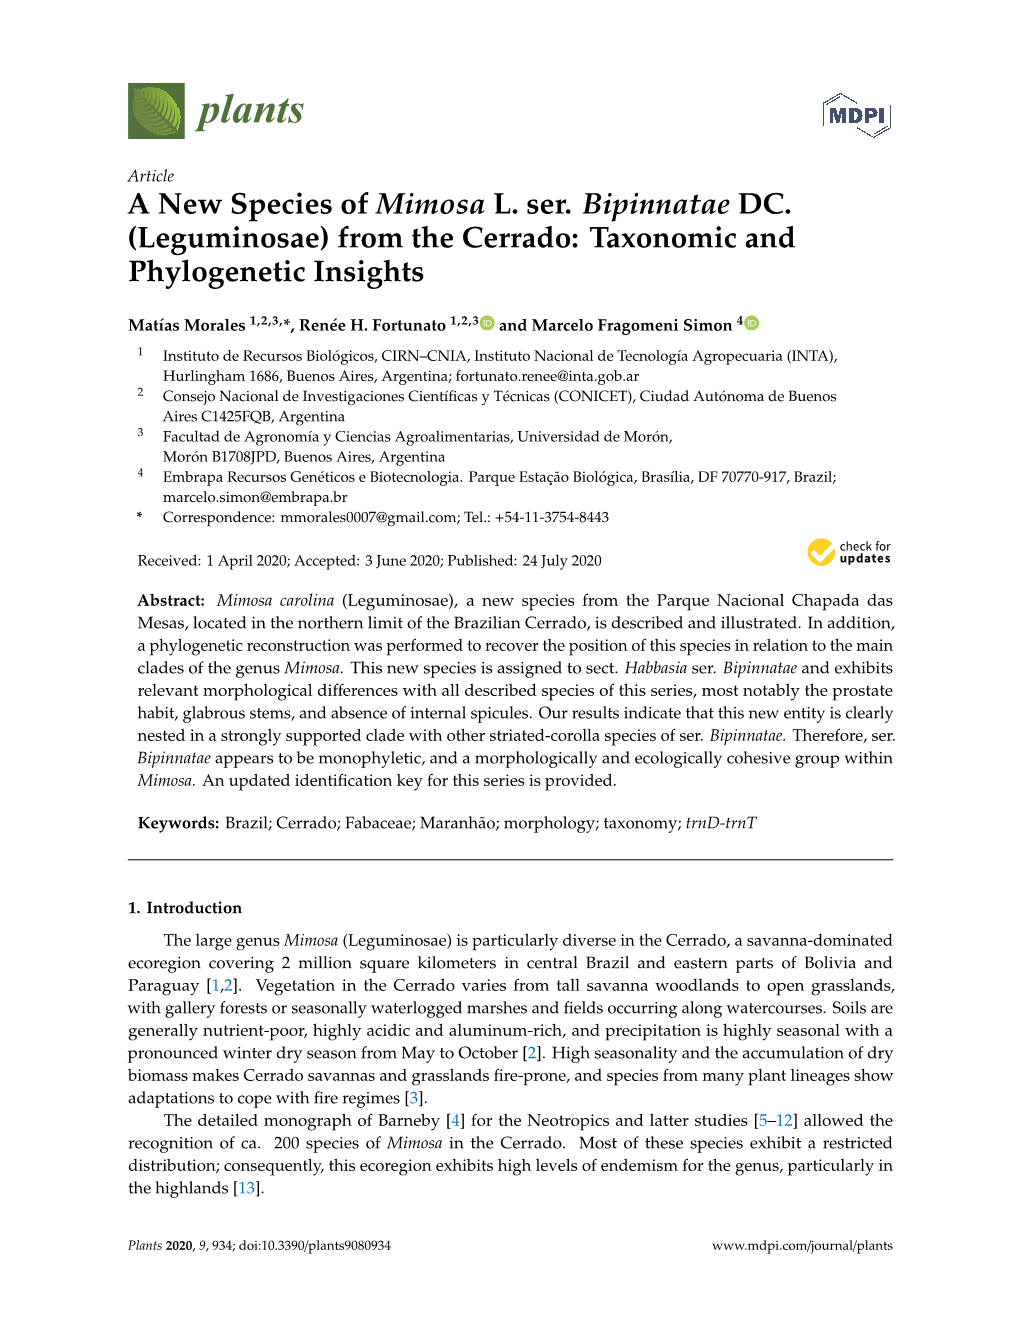 A New Species of Mimosa L. Ser. Bipinnatae DC. (Leguminosae) from the Cerrado: Taxonomic and Phylogenetic Insights